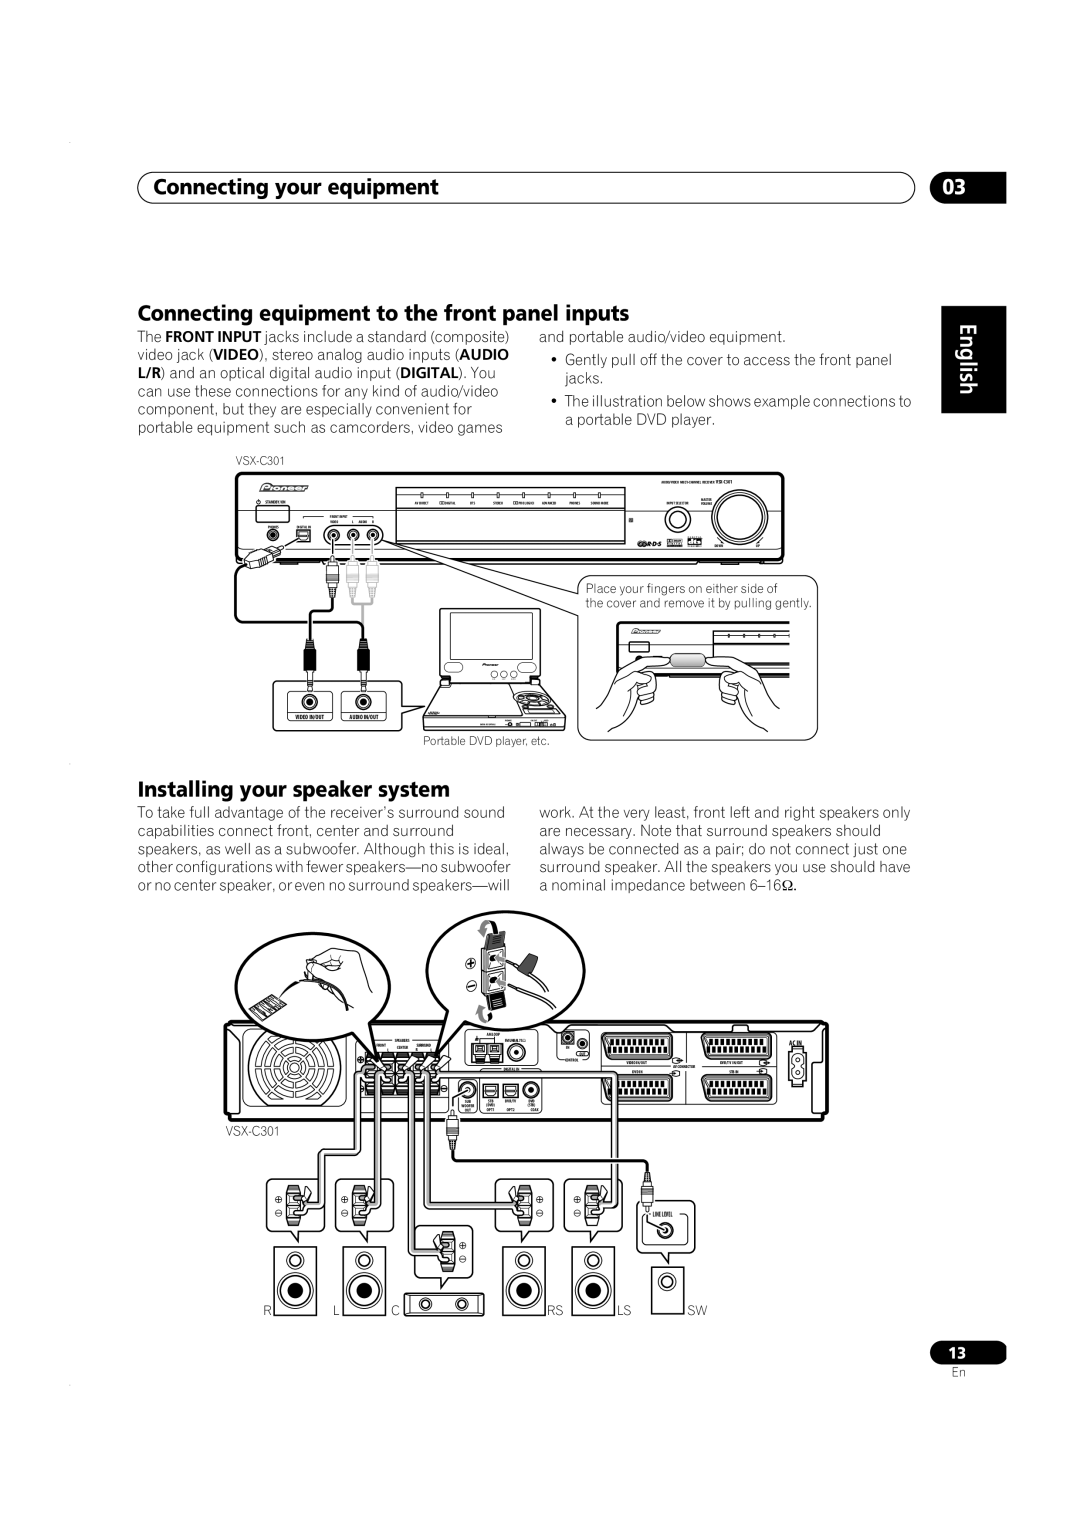 Pioneer VSX-C301 Connecting equipment to the front panel inputs, Installing your speaker system, Connecting your equipment 